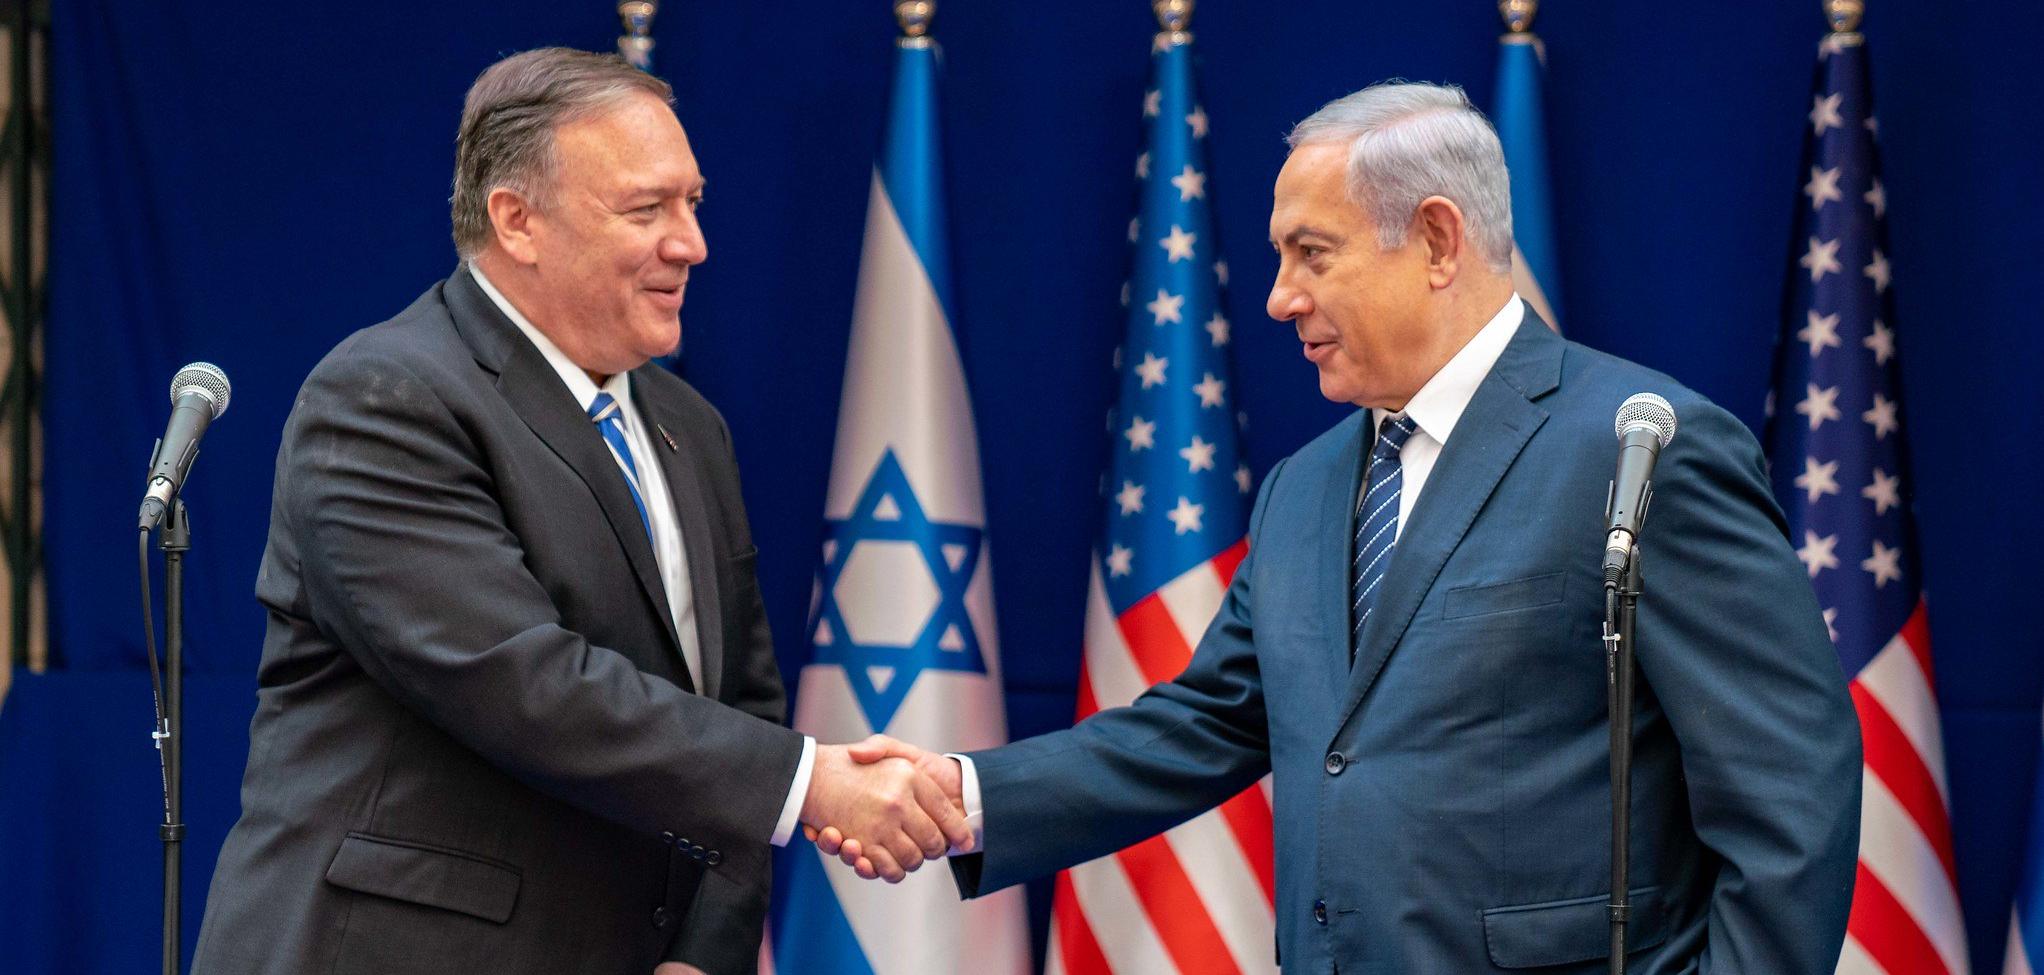 U.S. Secretary of State and Christian Zionist Mike Pompeo meets with Israeli Prime Minister Benjamin Netanyahu in Israel, on October 18, 2019. [State Department Photo by Ron Przysucha/Flickr]